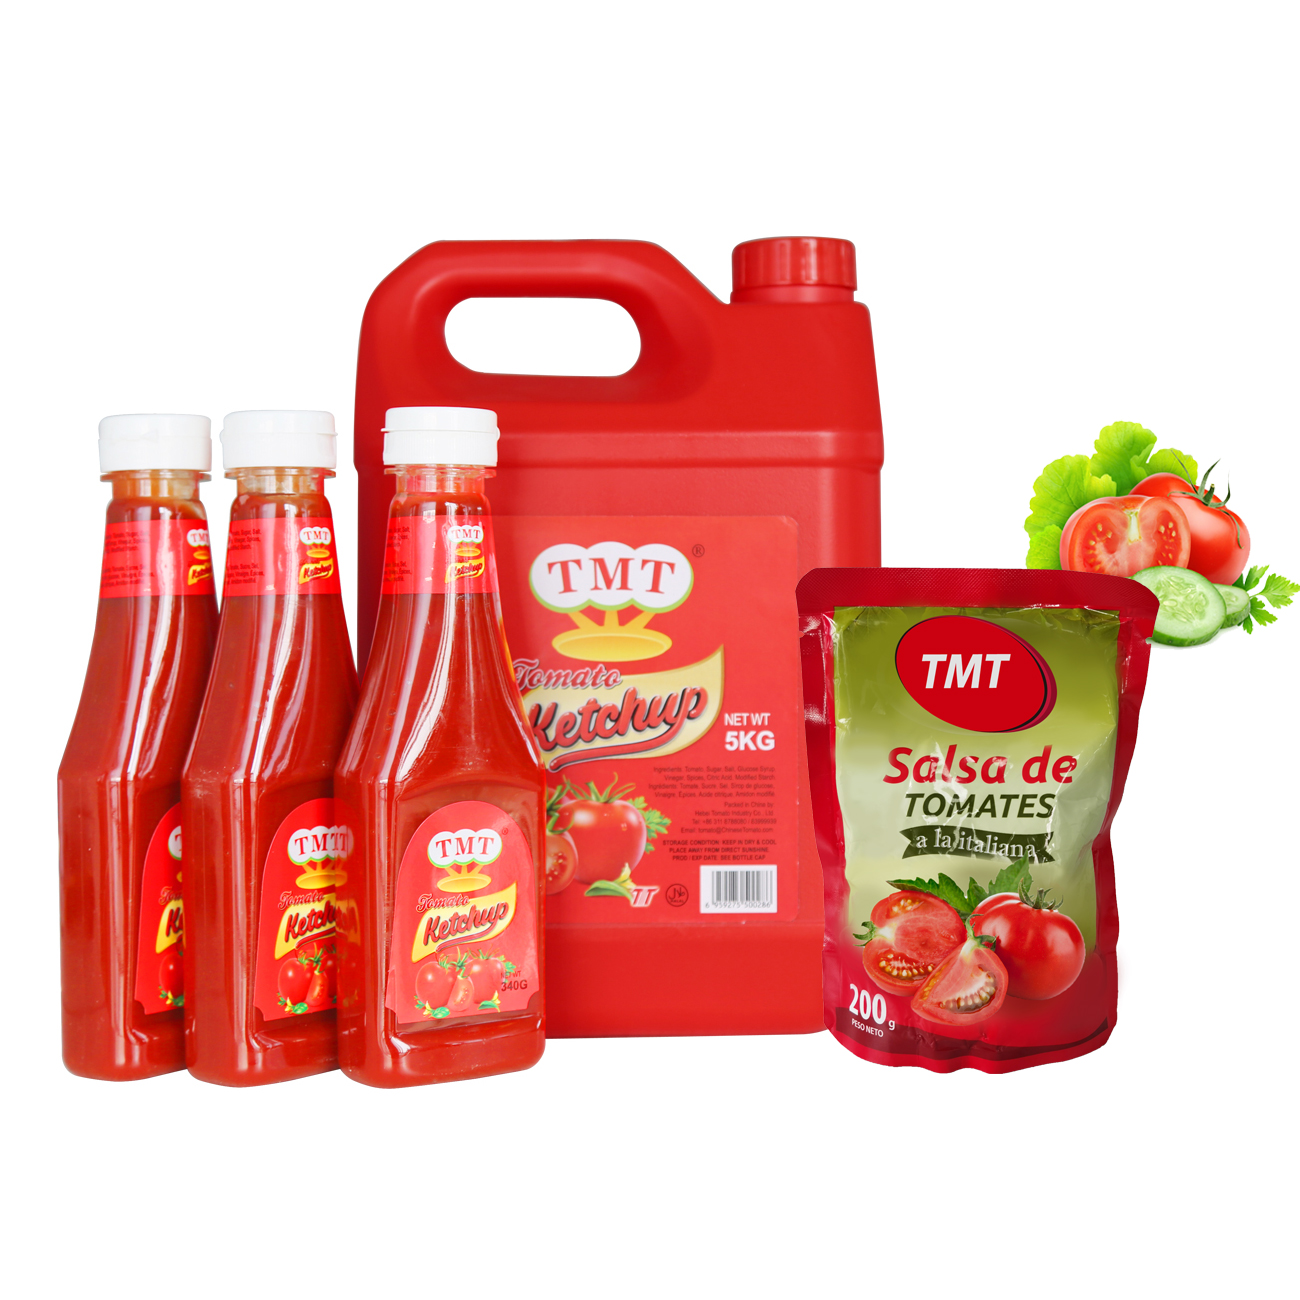 340g Tomato Sauce Tomato Ketchup with Bottle Packing